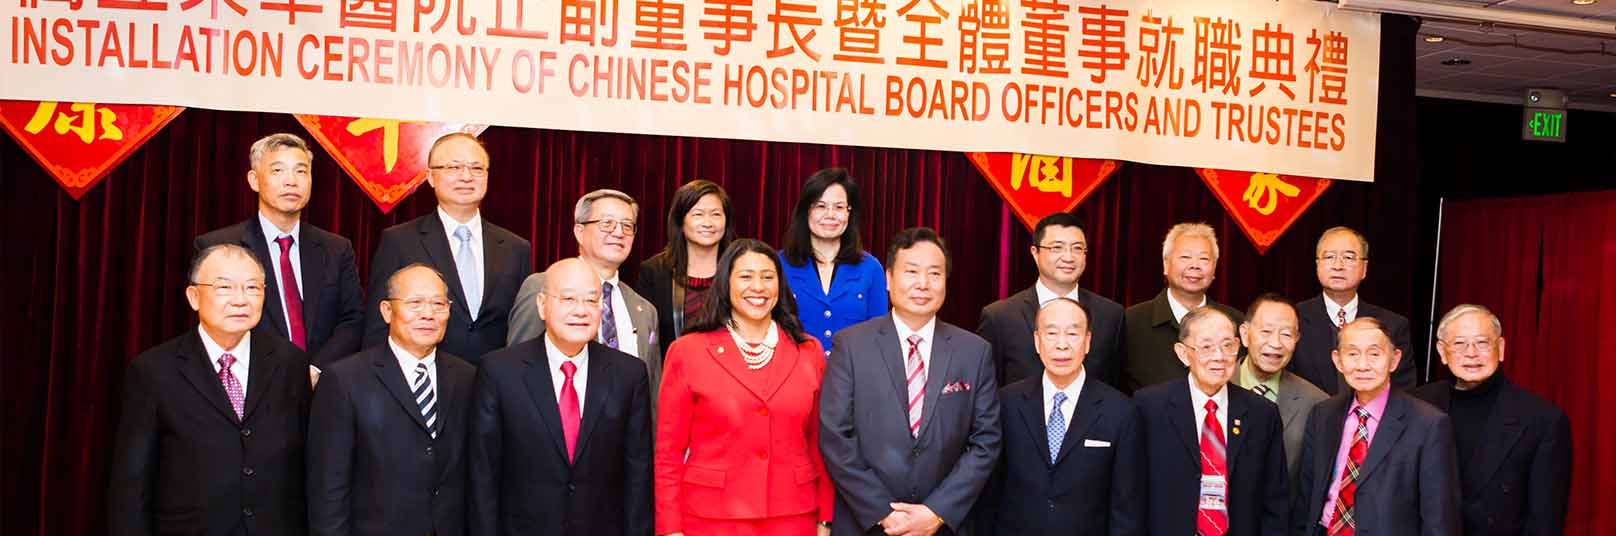 Installation Ceremony for Chinese Hospital Board of Trustees 2019